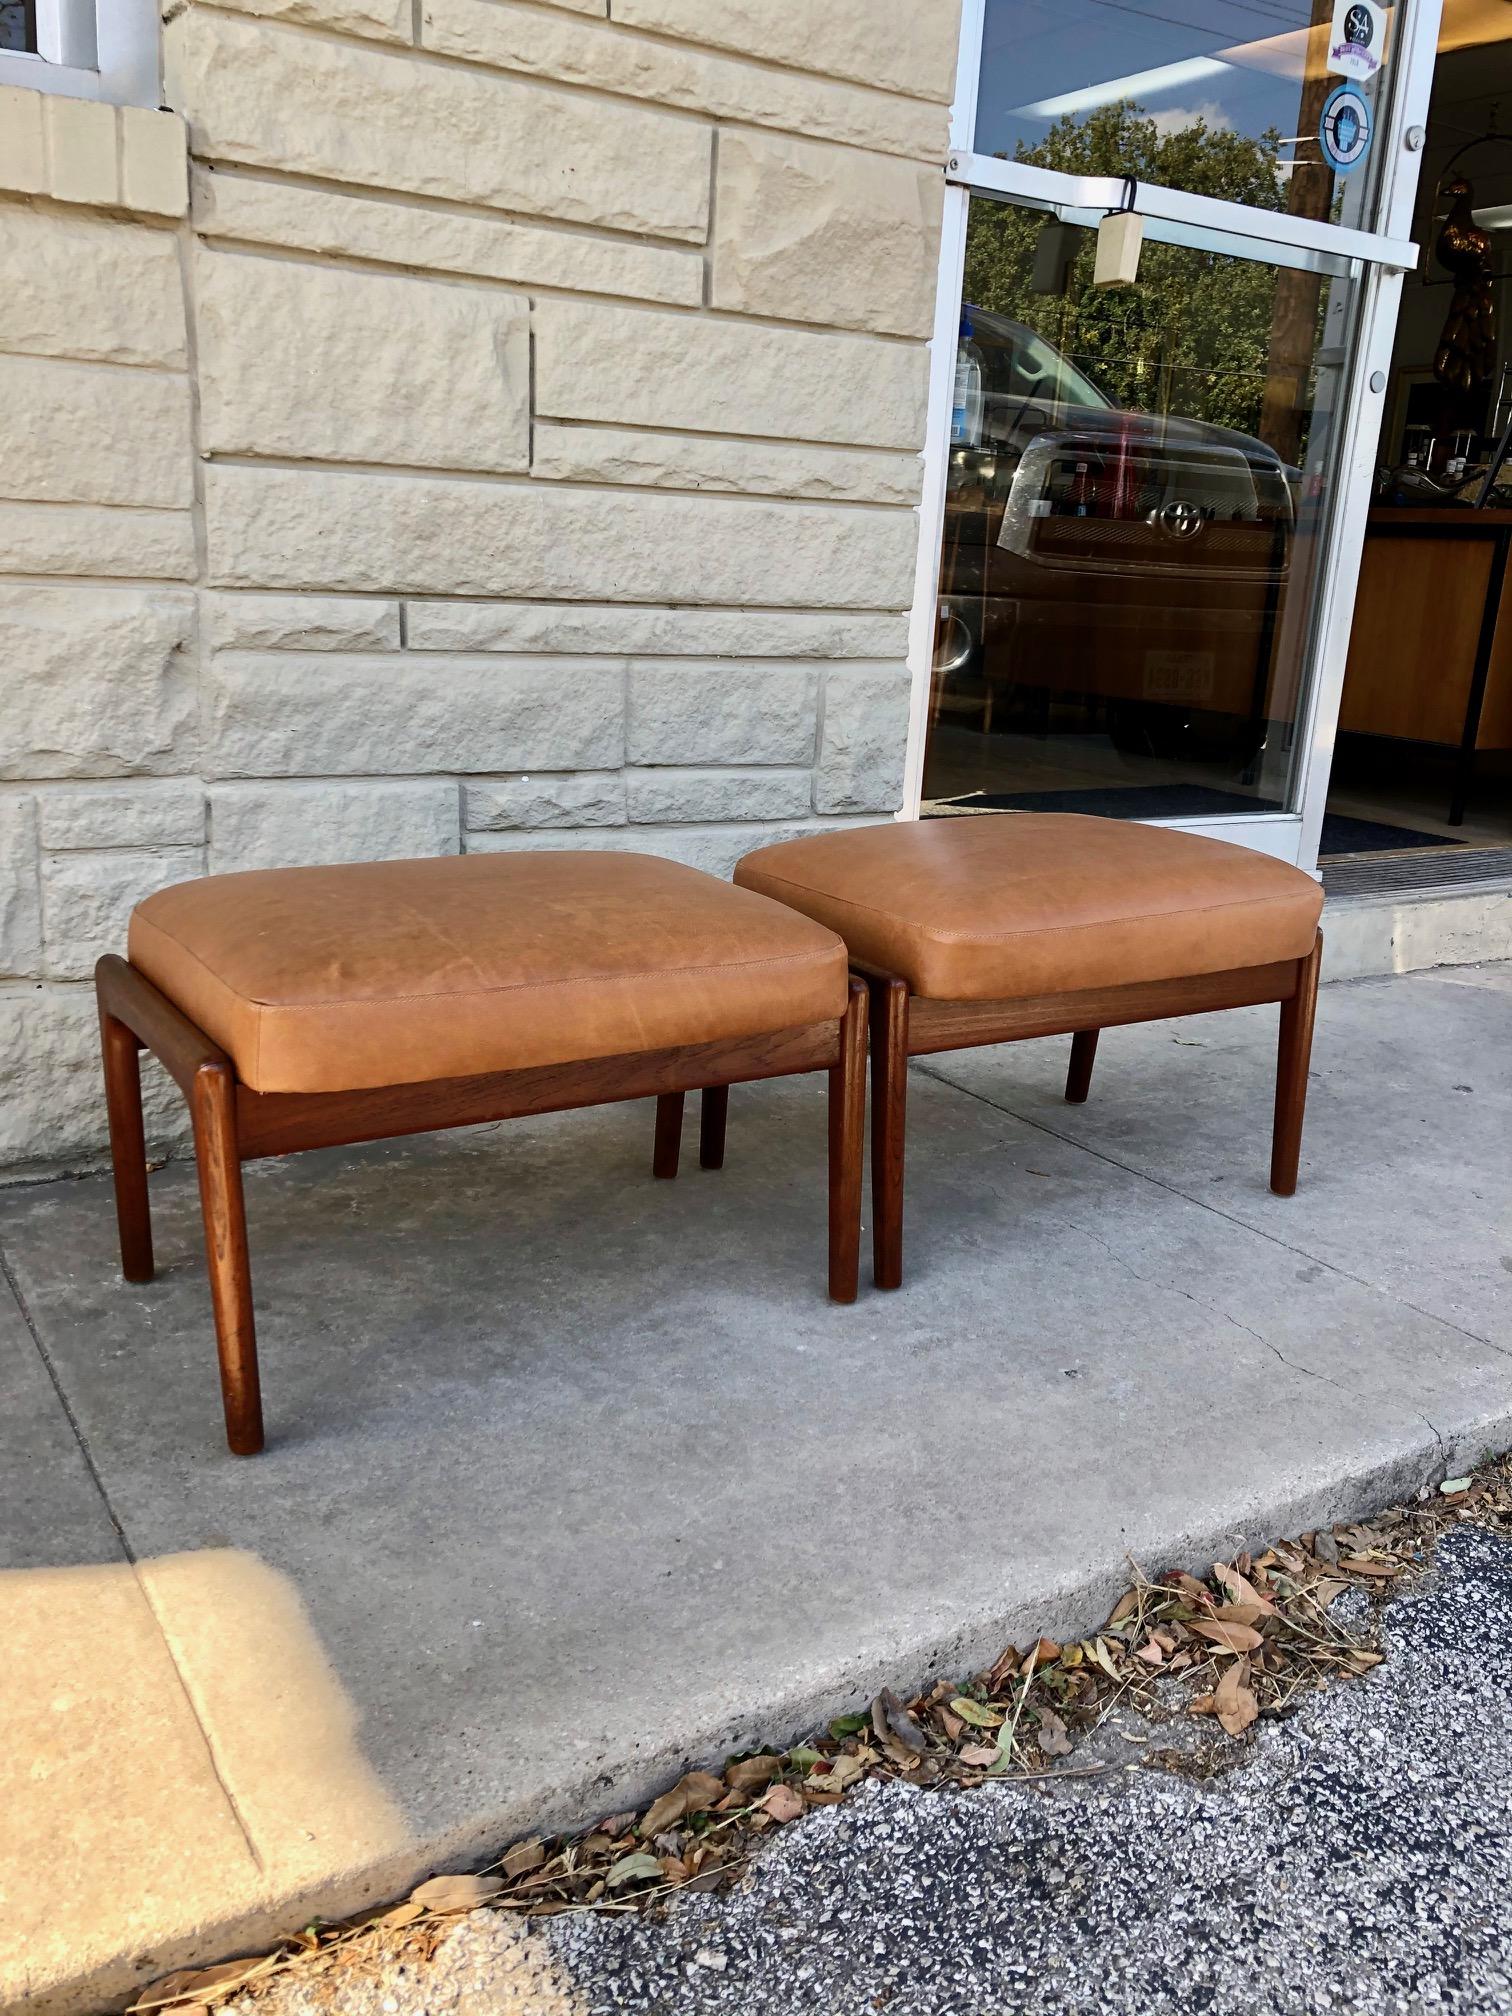 These ottomans are in overall good condition. Reupholstered in tan leather. Teak frame adjusts for reclining. See photos
circa 1960s. Sweden.
Dimensions:
15